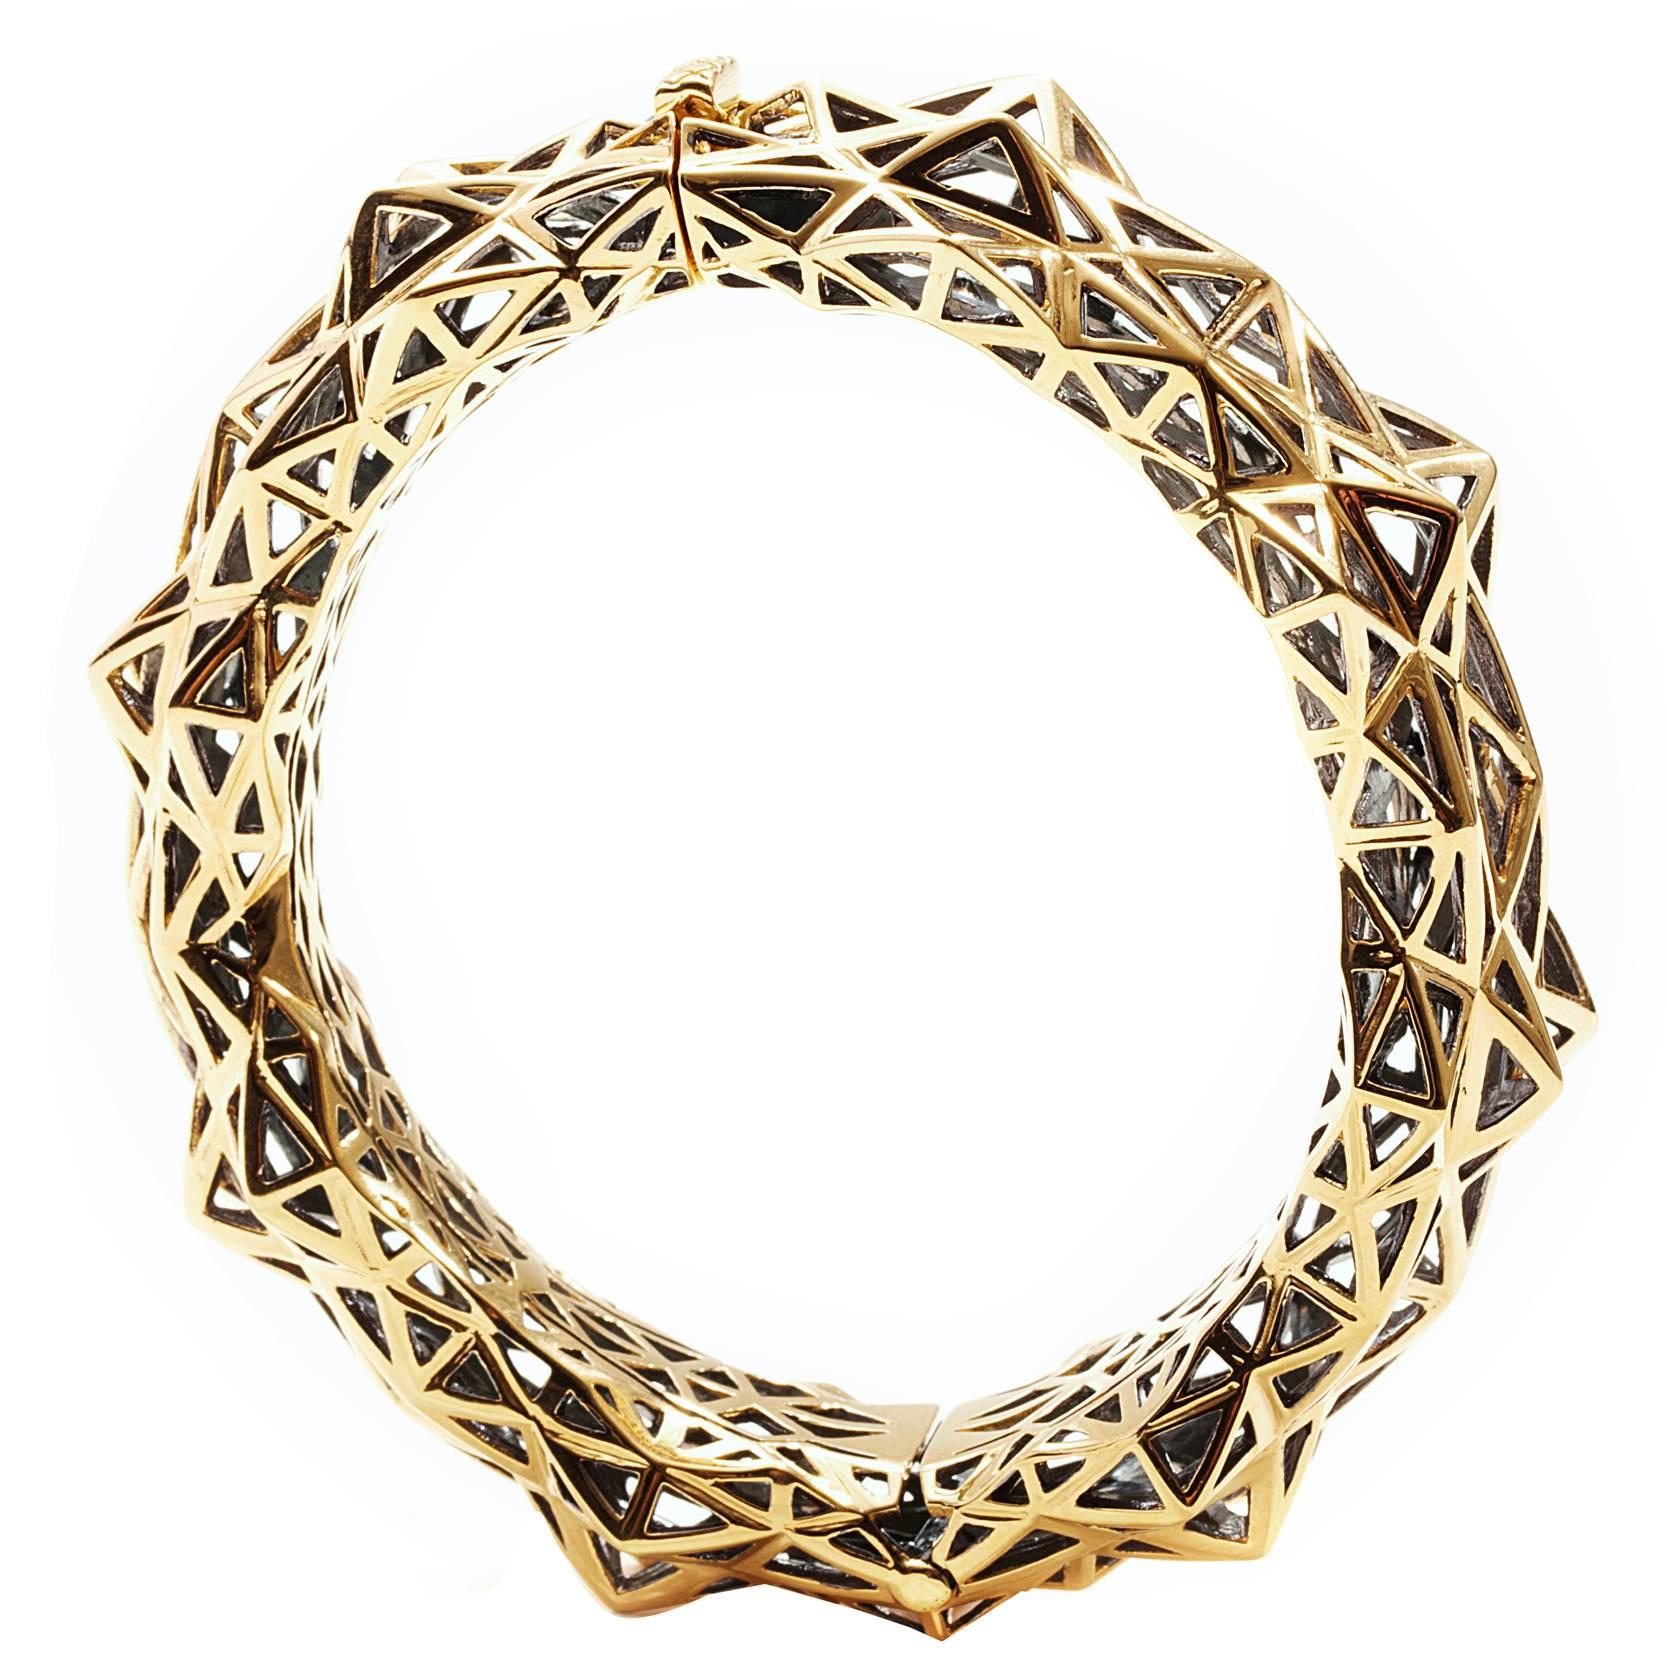 Stellated Gold Bracelet For Sale